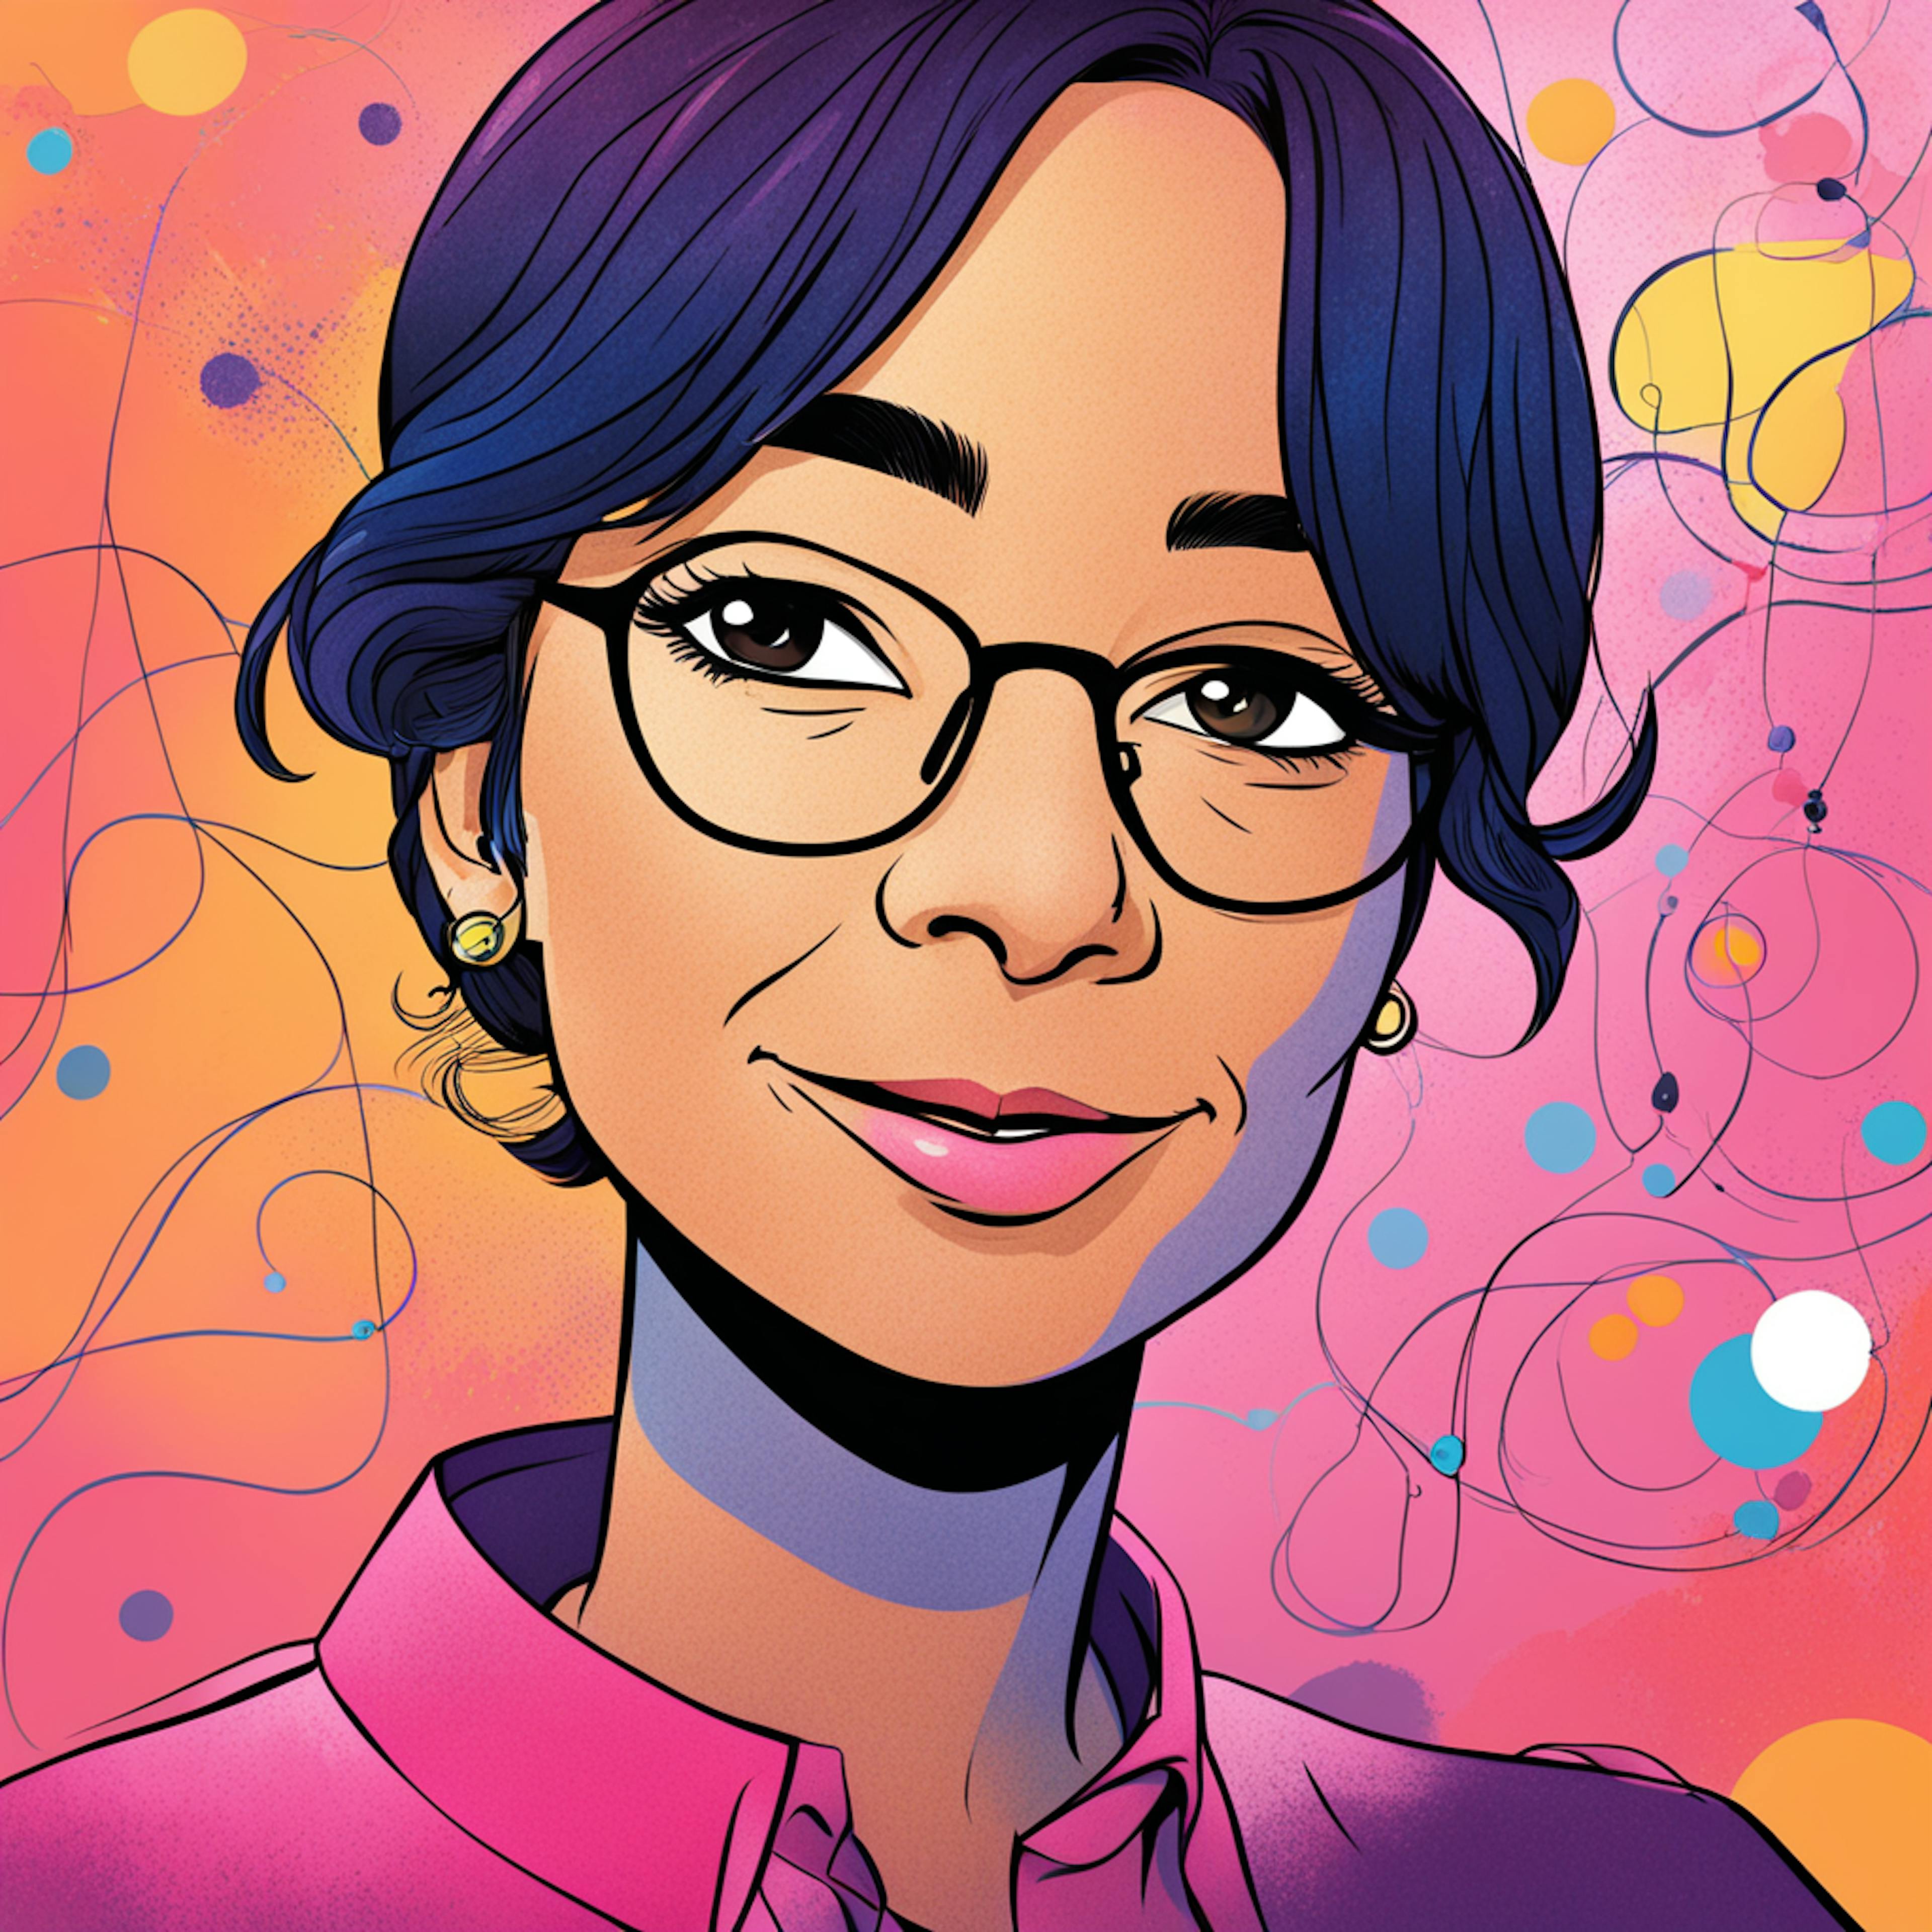 A vibrant cartoon portrait of a woman with glasses, set against a colorful background of interconnected ideas and elements, illustrating the creative strategies on how to market your coaching business.